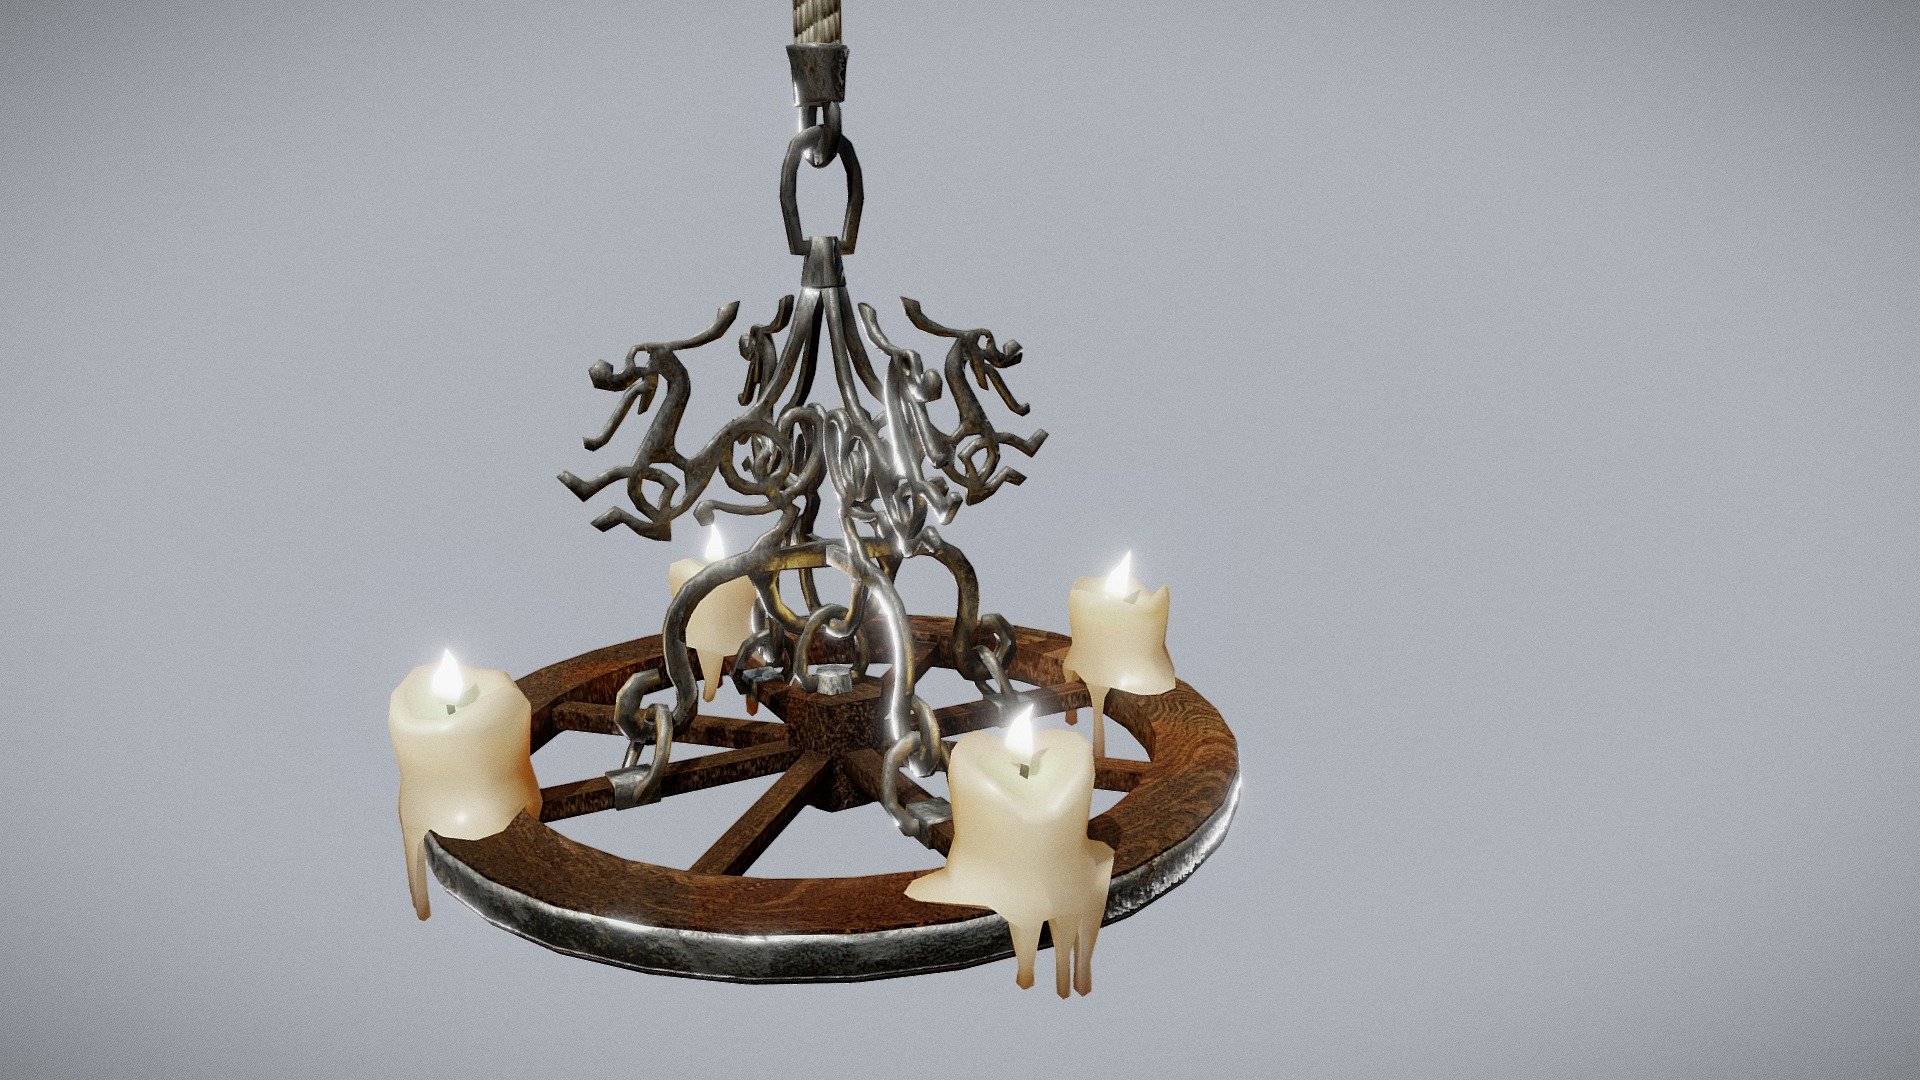 Welcome and thank you for checking my model out. This is my original 3D design and creation: A low poly game ready viking art inspired hanging wagon wheel chandelier with baked materials: Normalmap, Specularmap, Translucency and Emission. Texture size: 4096x4096

Created, modeled, unwrapped, textured and baked in Blender 3d model